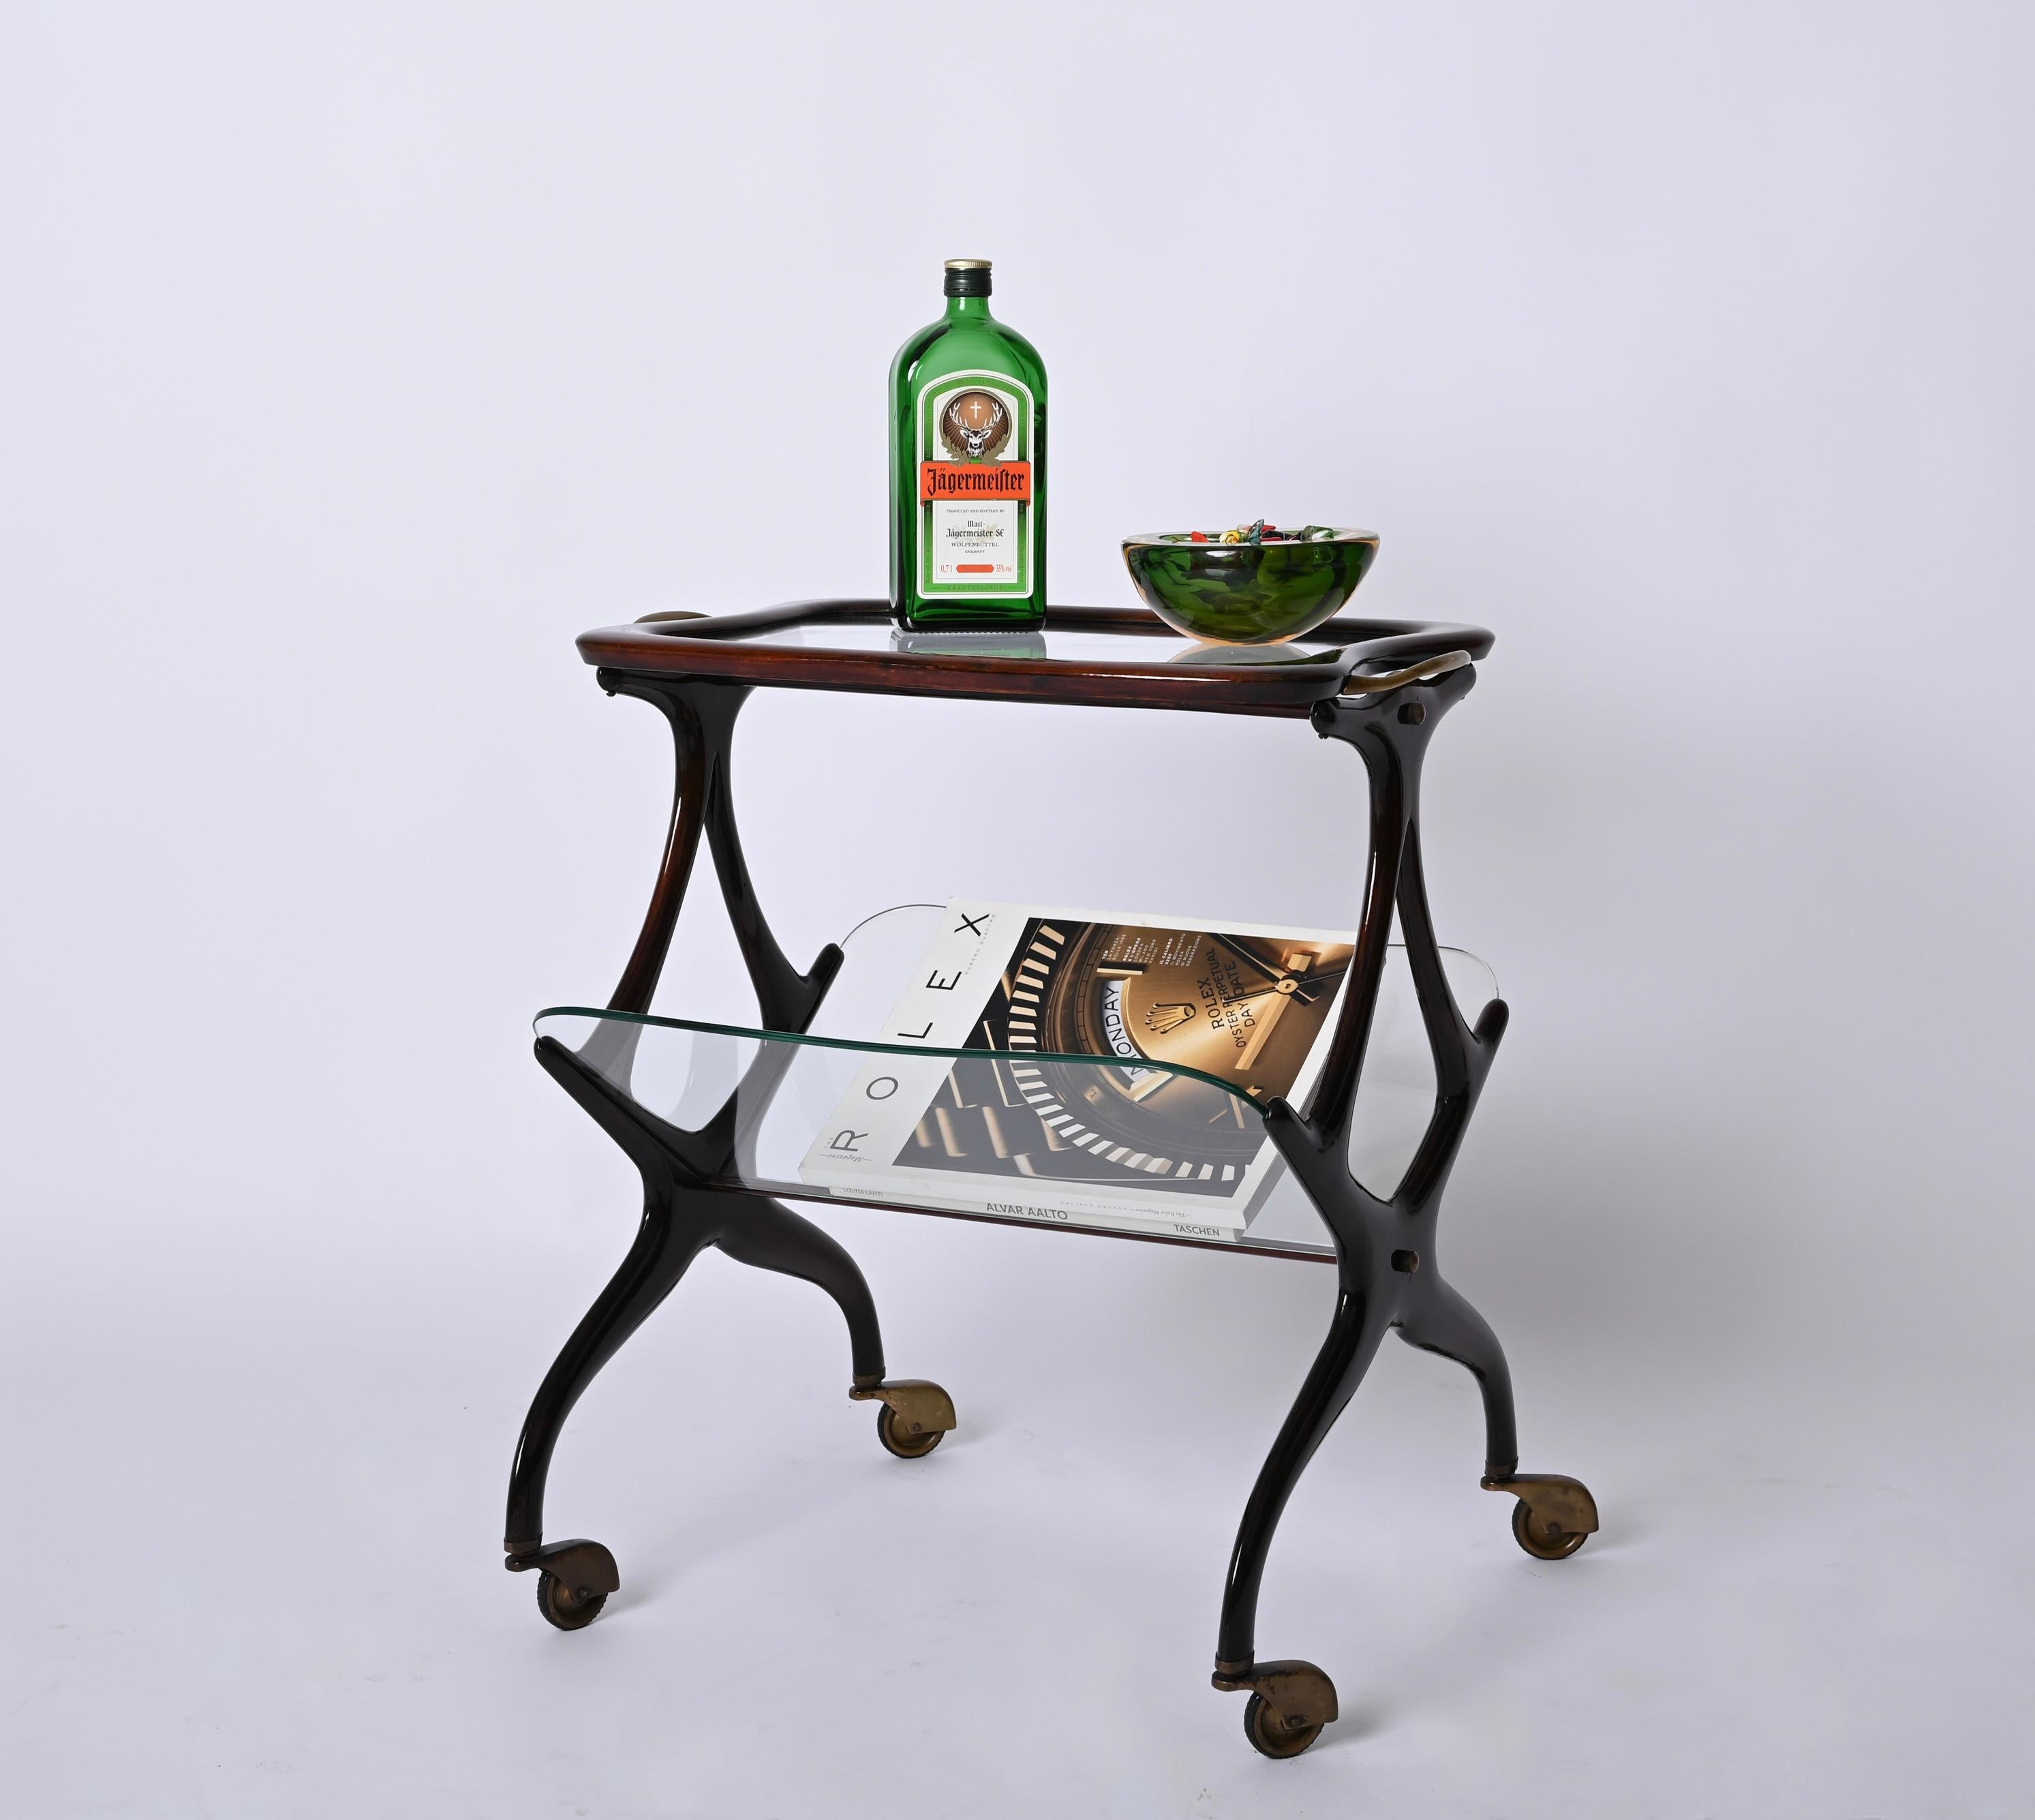 Marvellous Mid-Century bar cart with magazine rack and bar cart. This wonderful piece was designed by Cesare Lacca and produced by De Baggis in Italy during 1950s.

This elegant magazine rack features a V shaped bottom shelf with 2 crystal glasses